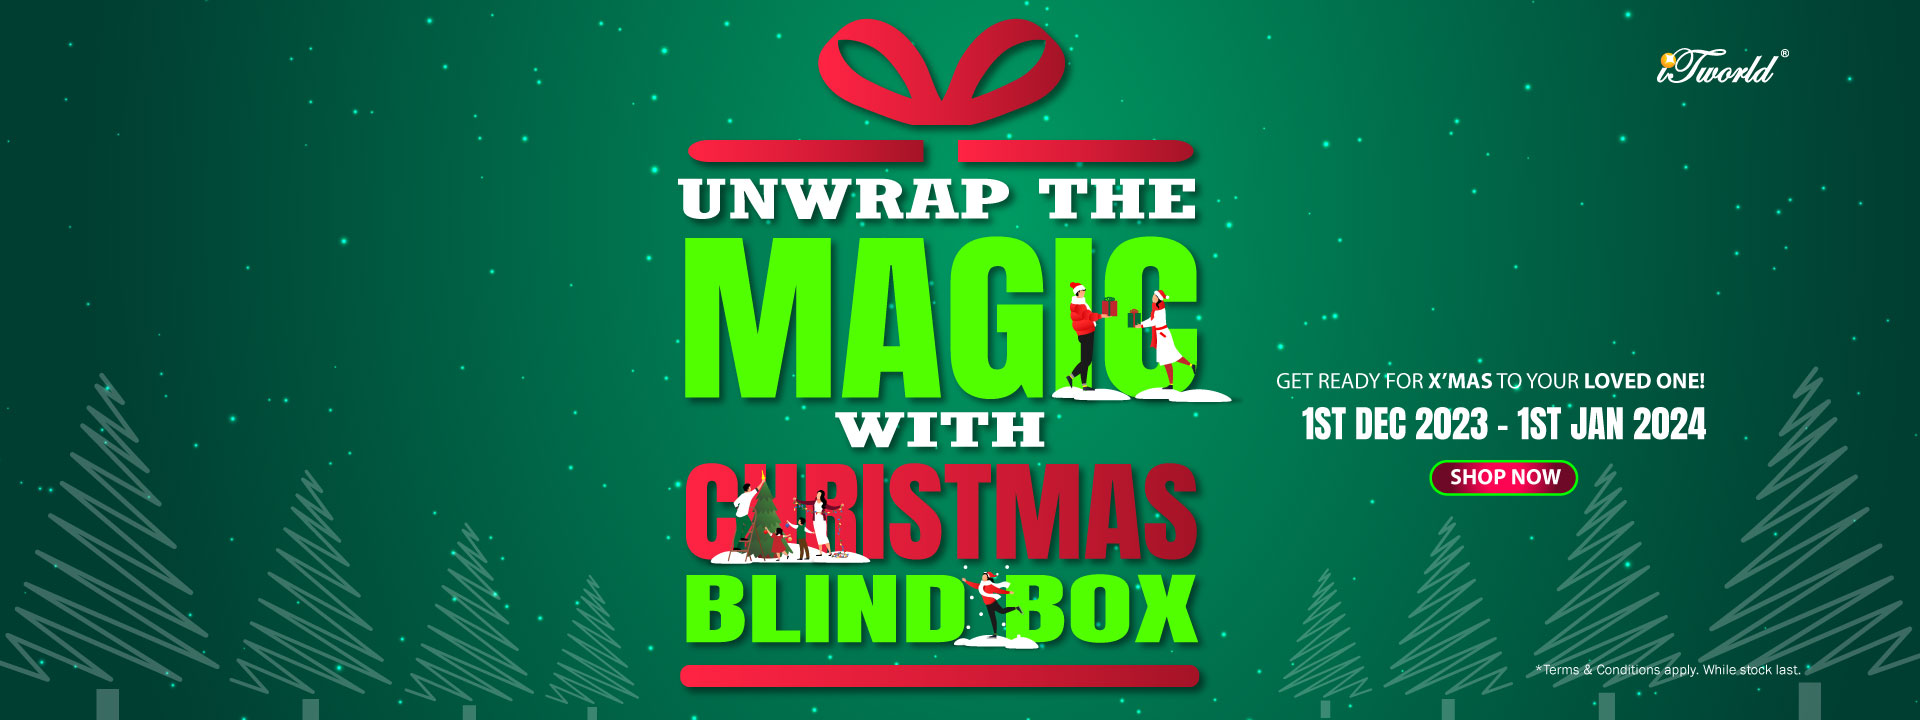 Unwrap the Magic with Christmas Blind Box